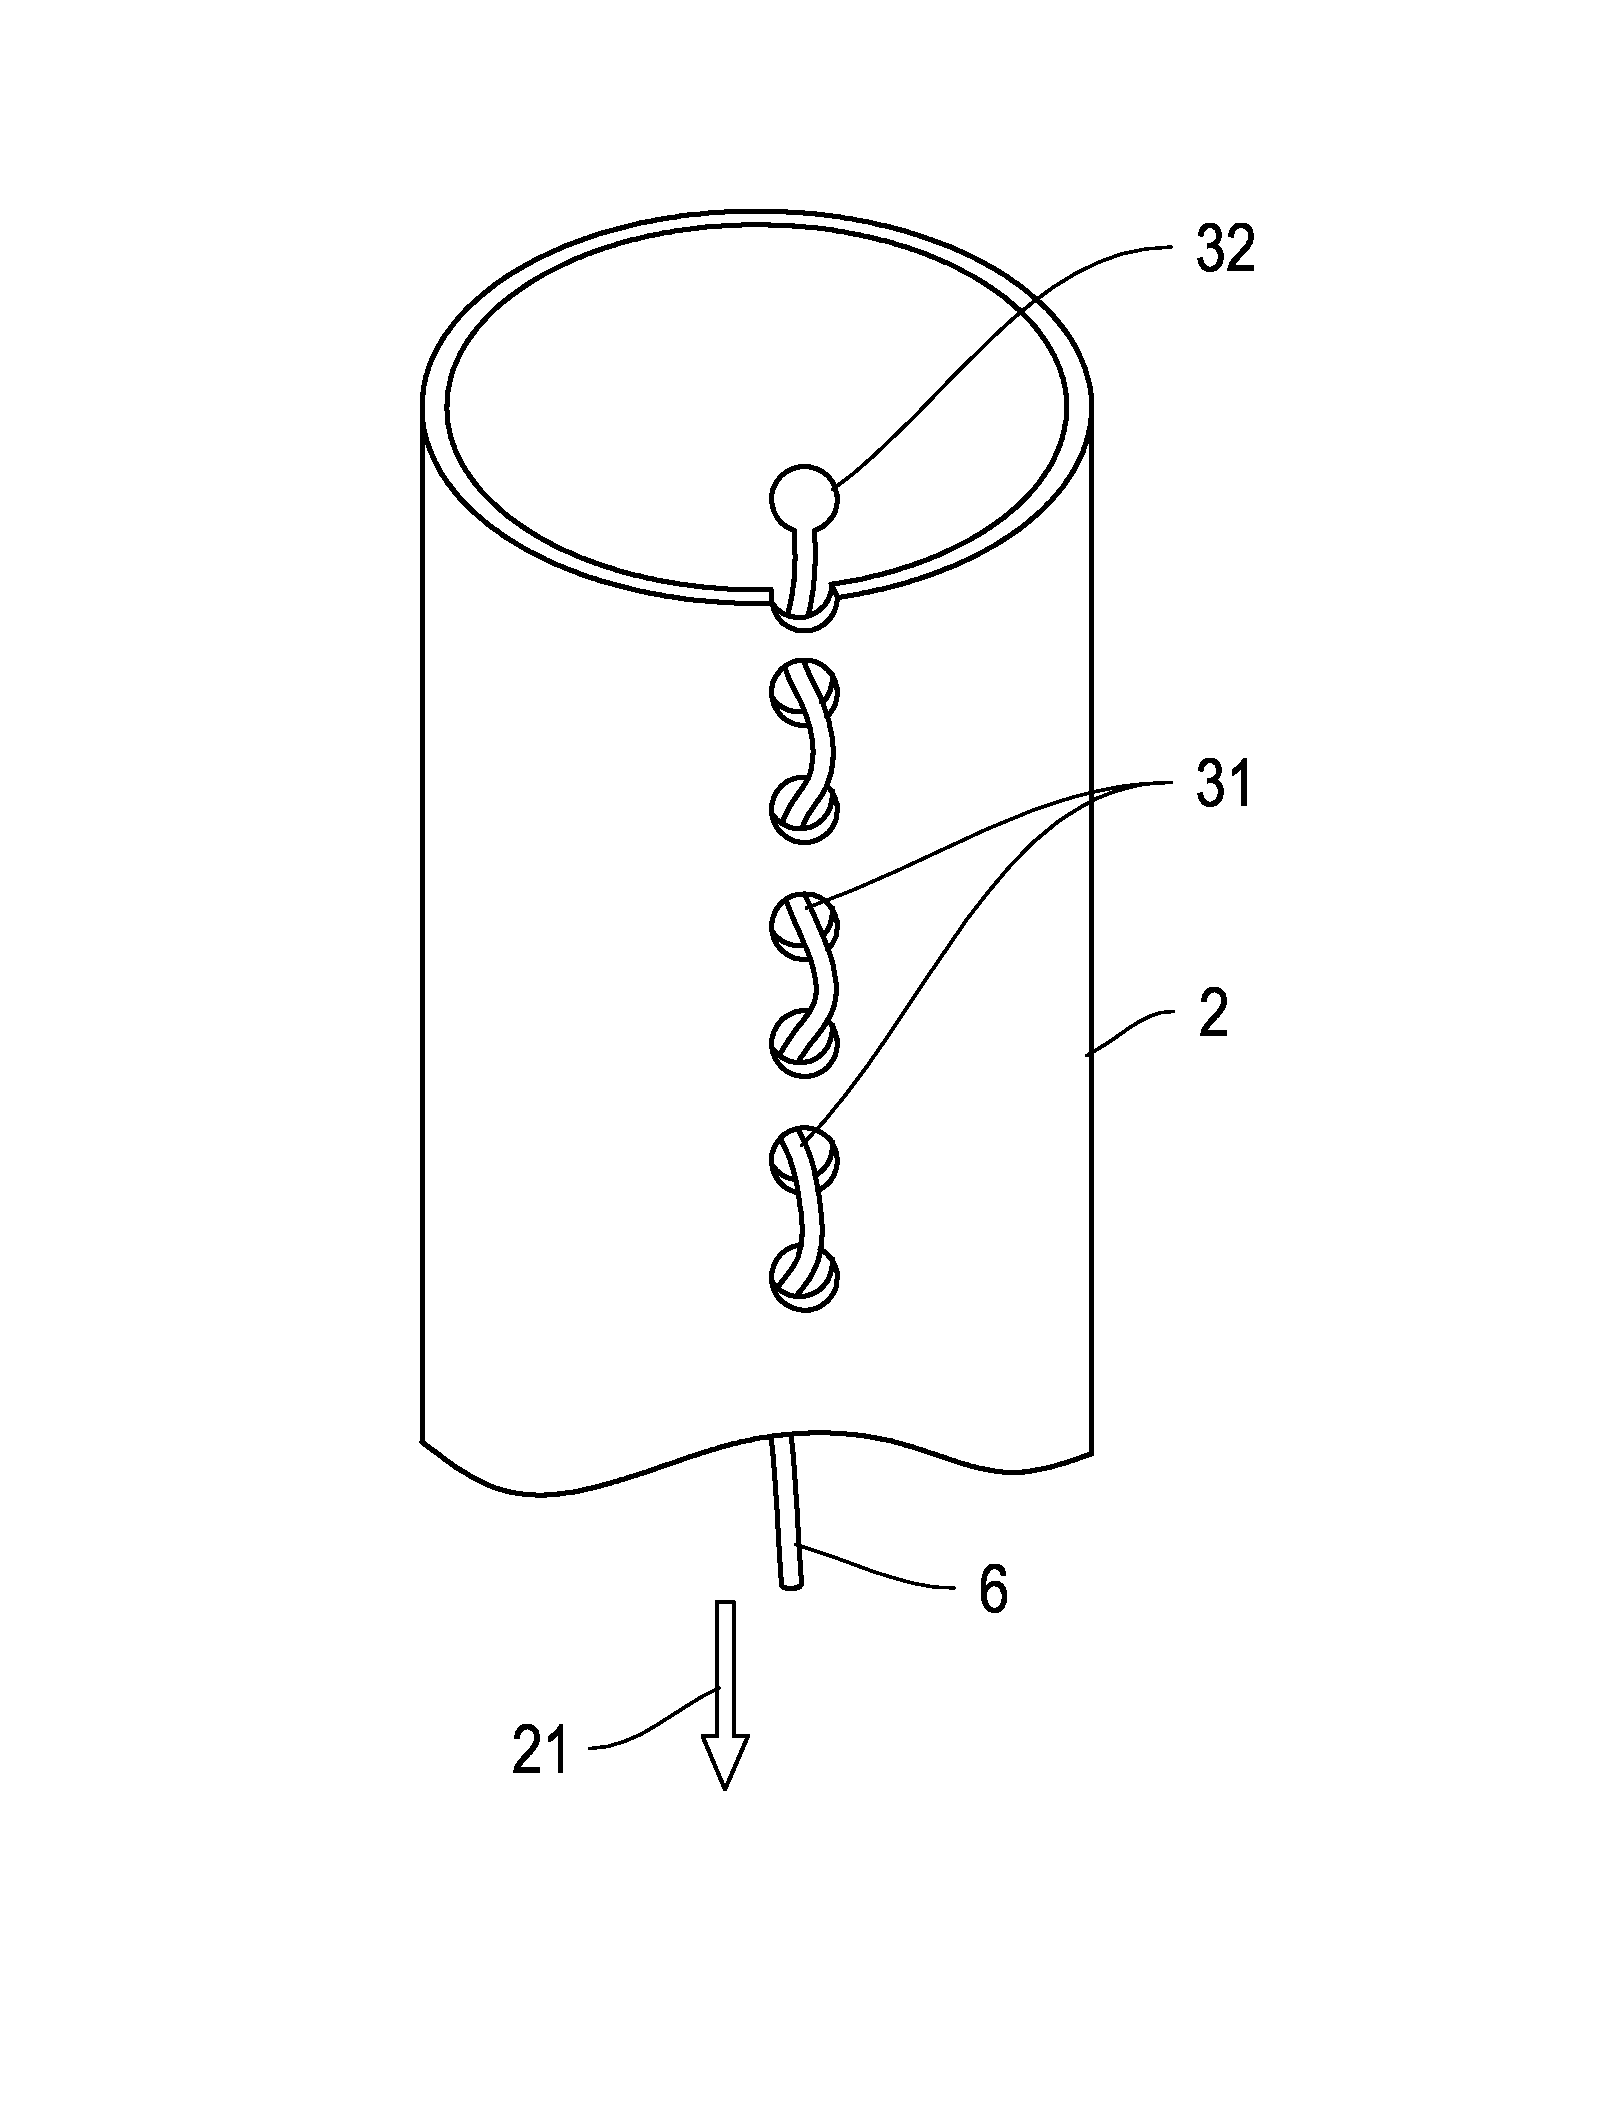 Delivery catheter with constraining sheath and methods of deploying medical devices into a body lumen